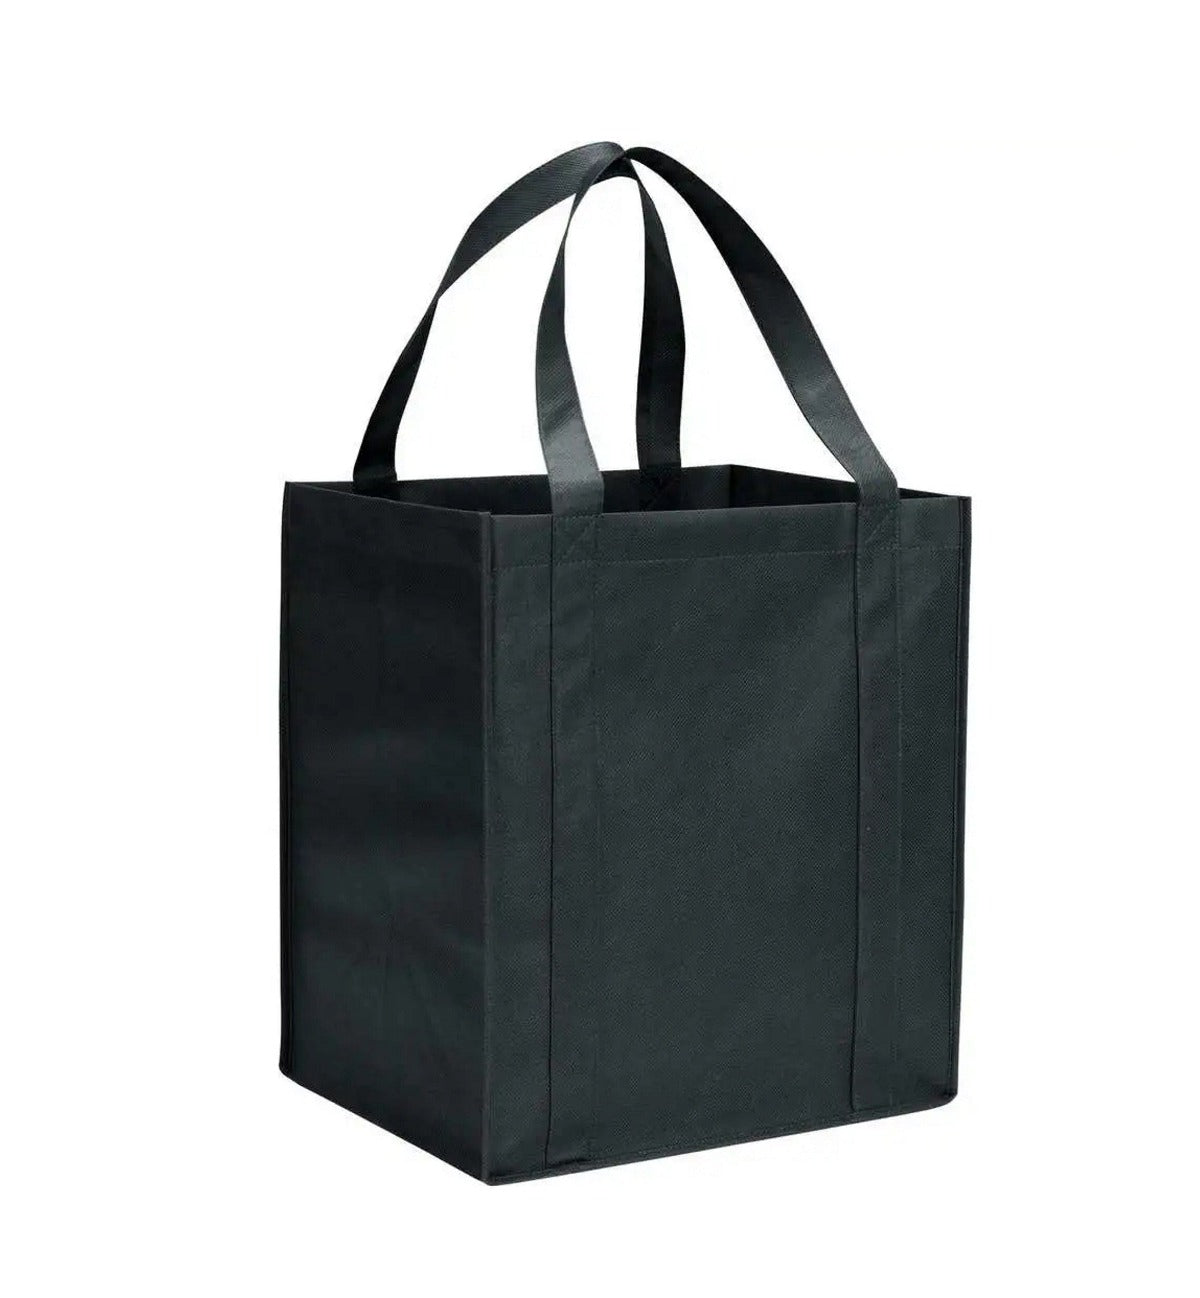 Black Reusable Grocery Bags Made From Recycled Plastic Bottles RPET  Shopping Bag Cheap Tote Bag for Daily Life - China Tote Bag and Canvas Tote  Bag price